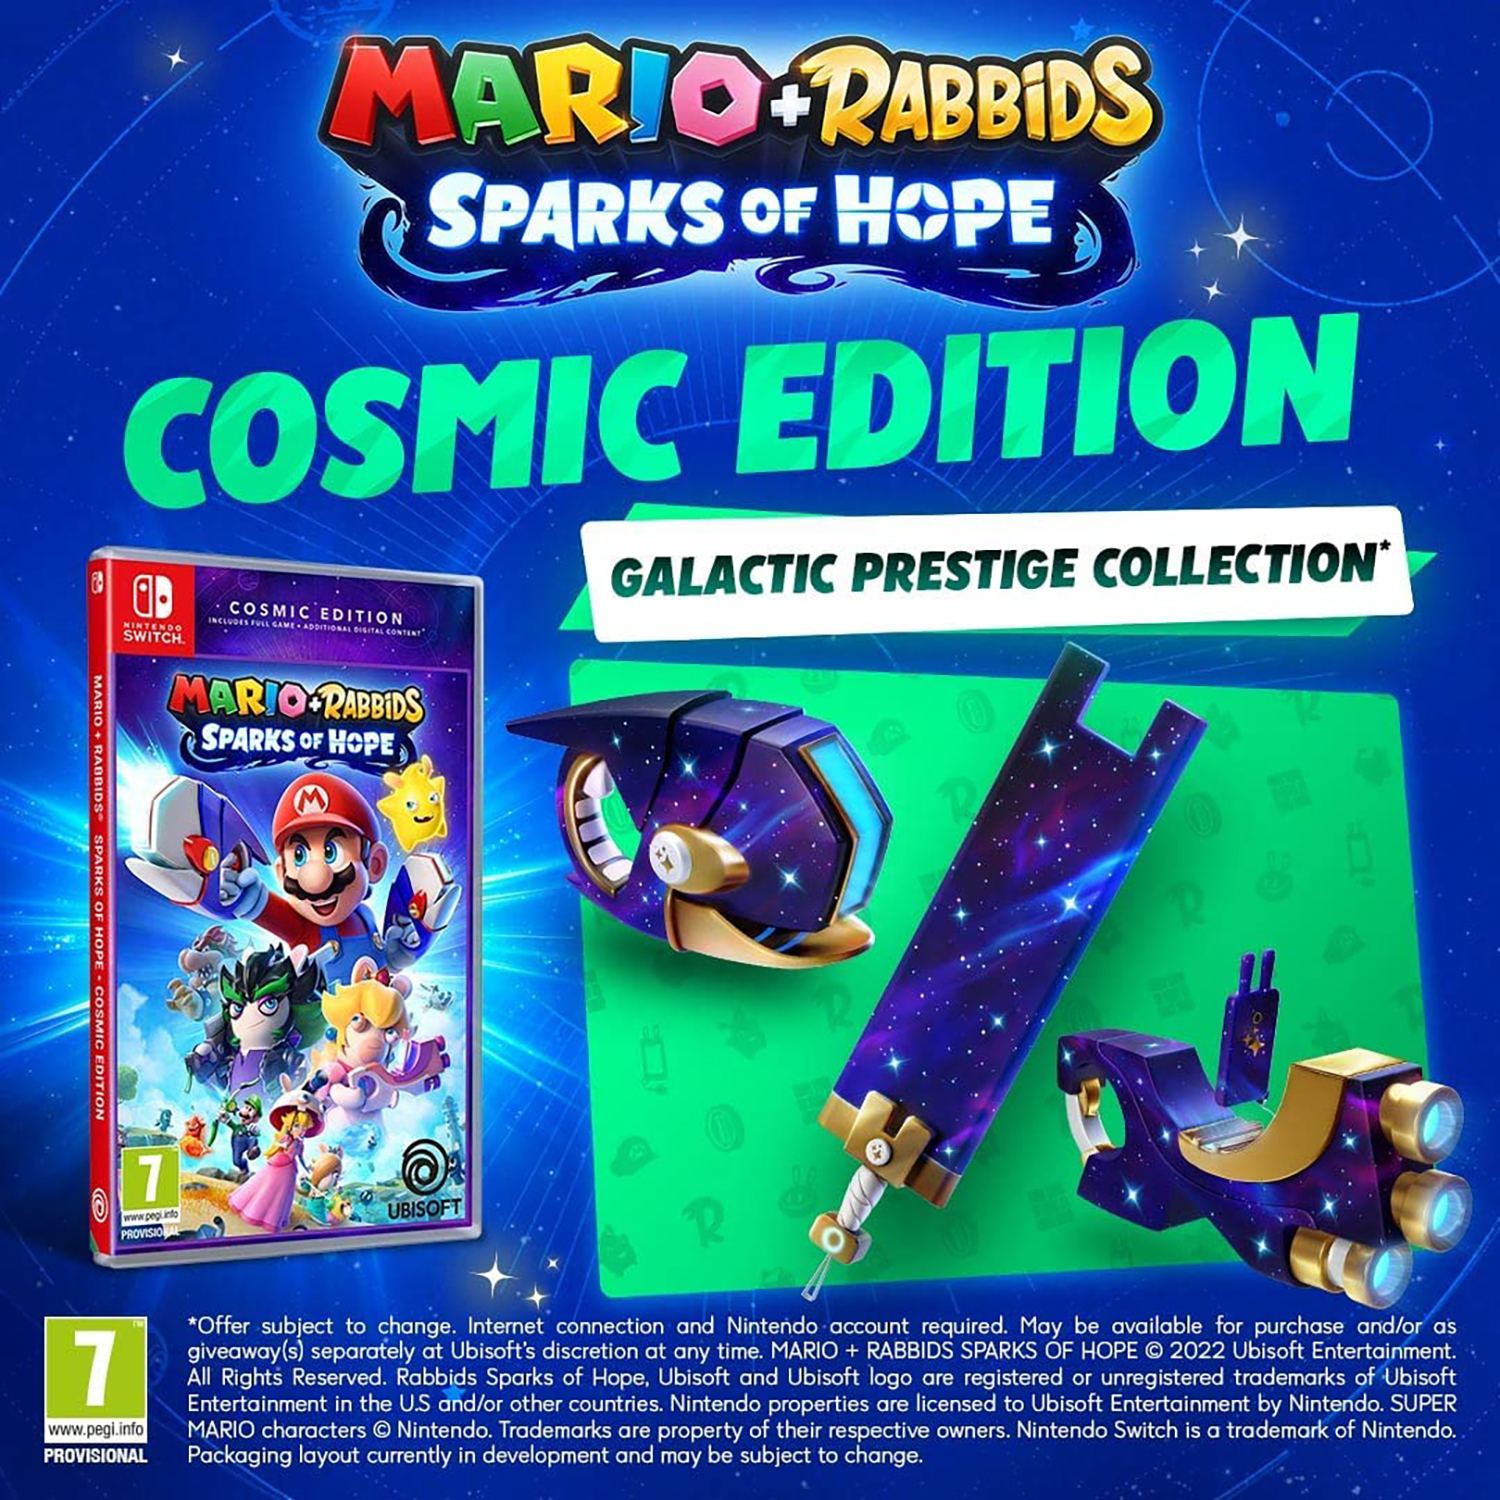 mario-rabbids-sparks-of-hope-cosmic-edition-for-nintendo-switch